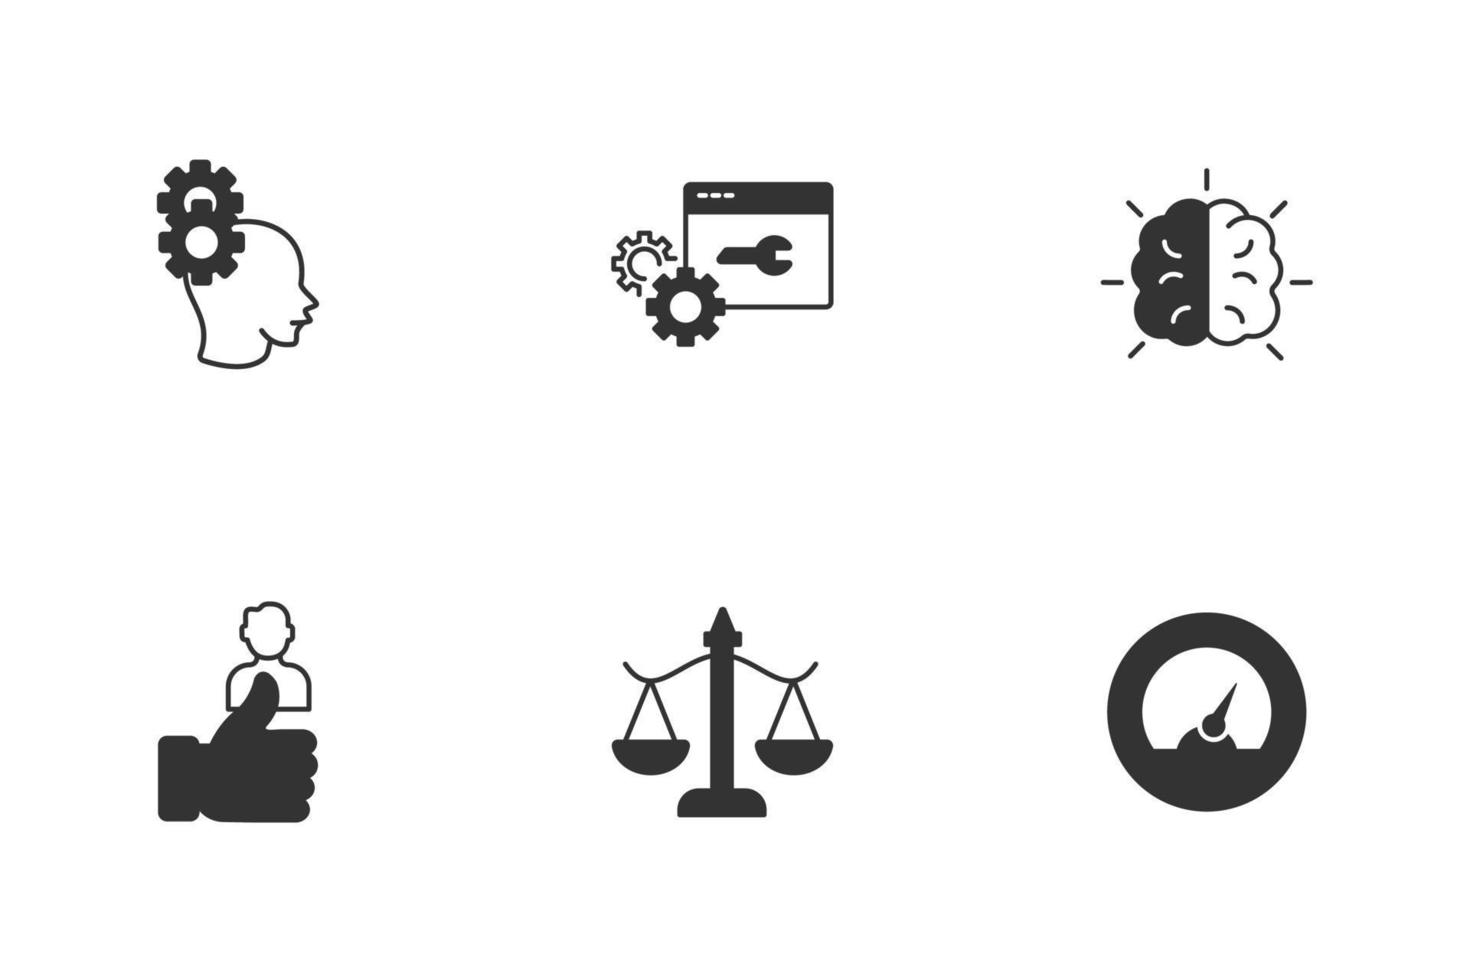 best practice icons set . best practice pack symbol vector elements for infographic web